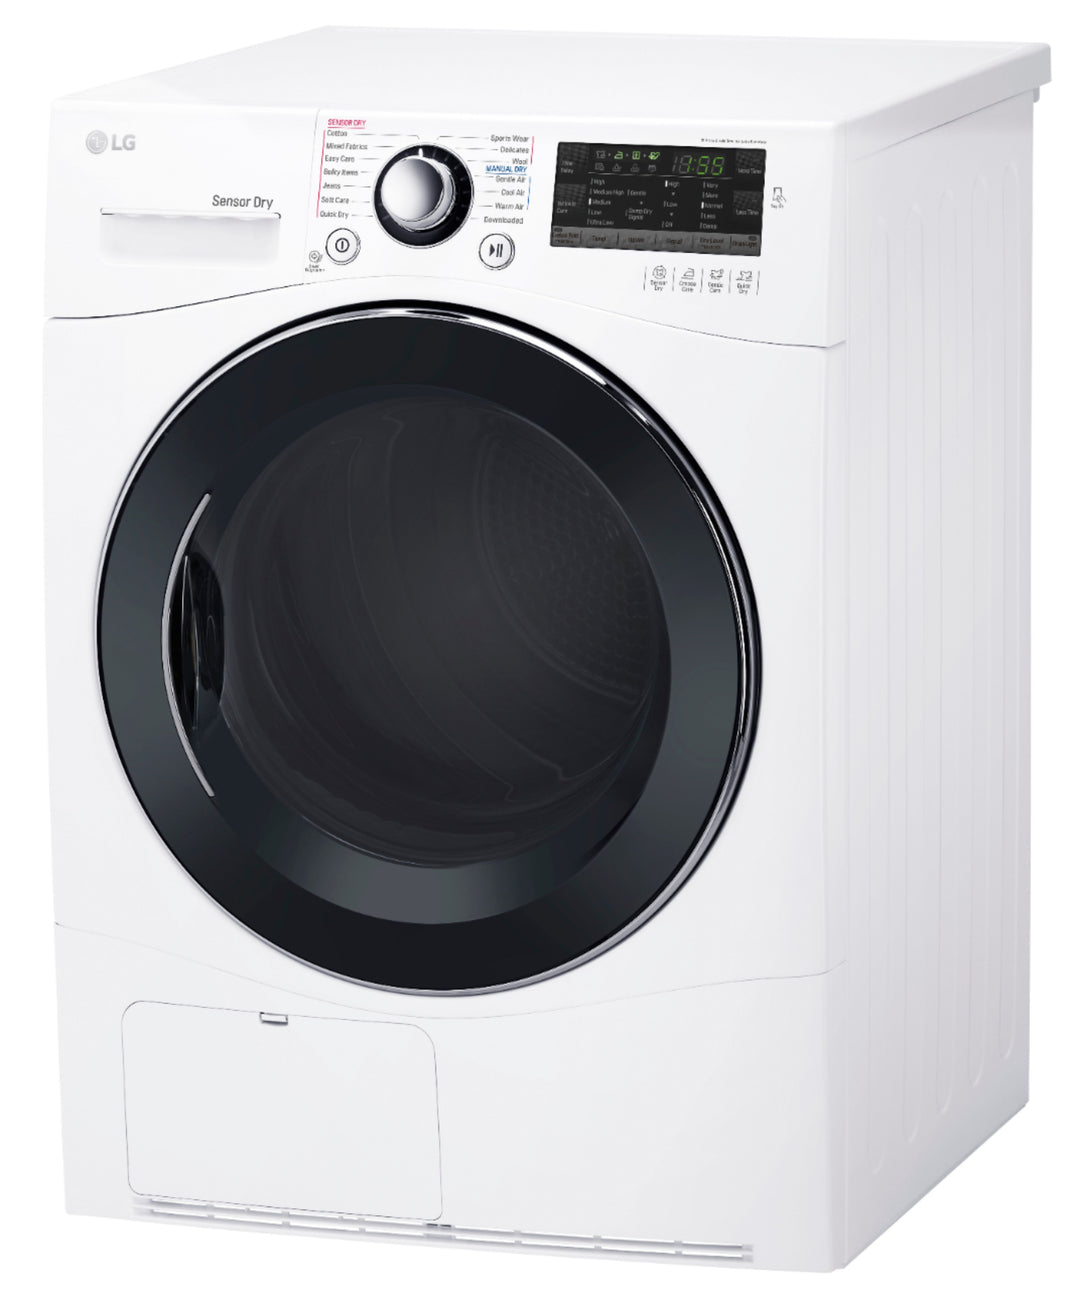 LG - 4.2 Cu. Ft. Electric Dryer with Sensor Dry - White_2